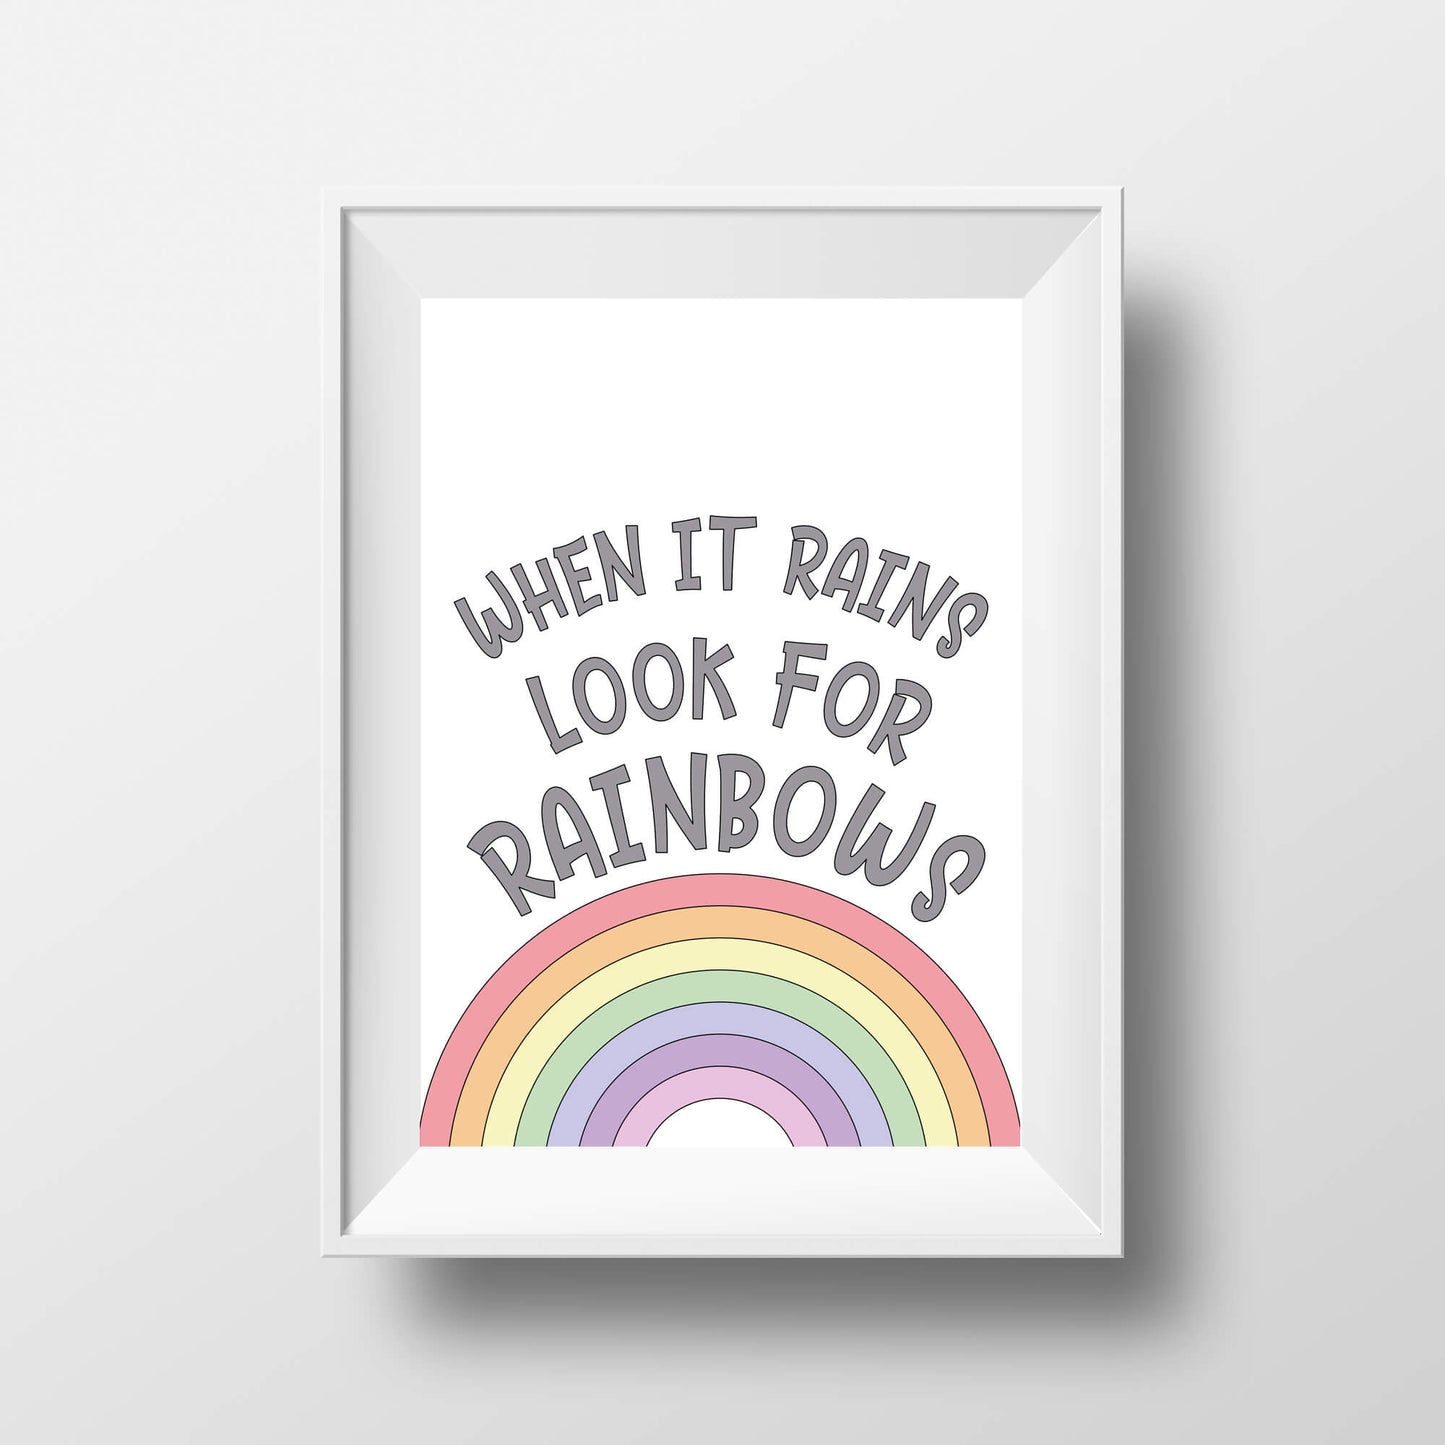 When It Rains Look For Rainbows Quote Print by SixElevenCreations. Product Code SEP0251